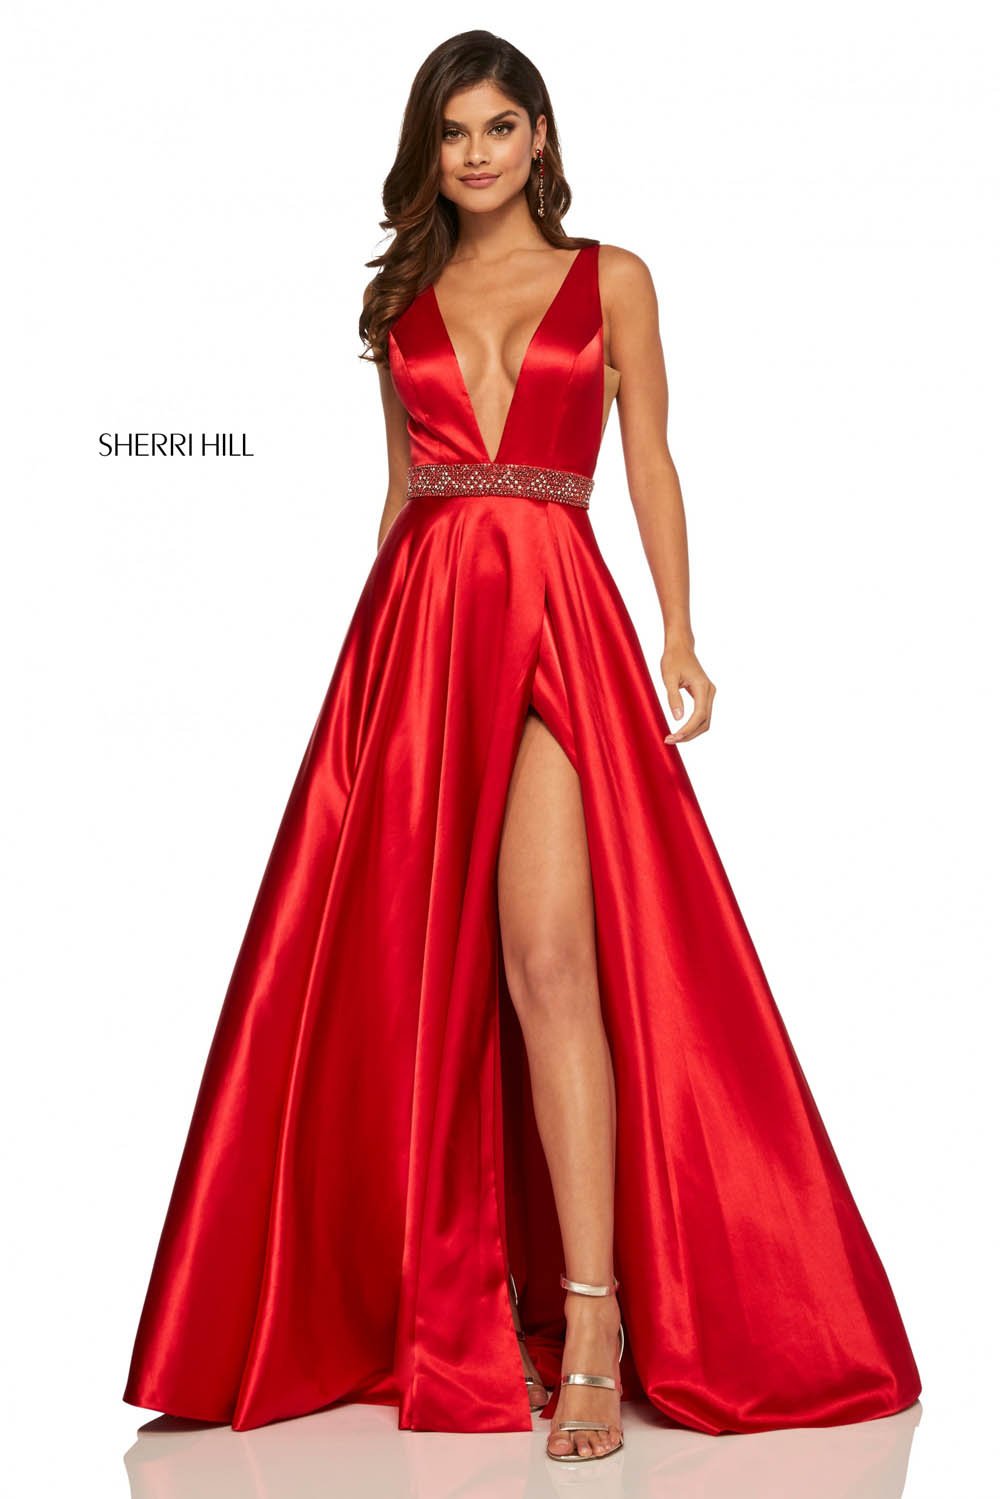 Sherri Hill 52564 dress images in these colors: Red, Emerald, Mocha, Peacock, Magenta, Yellow, Royal, Teal, Orange, Rose, Turquoise, Wine, Aqua, Lilac, Black, Navy.